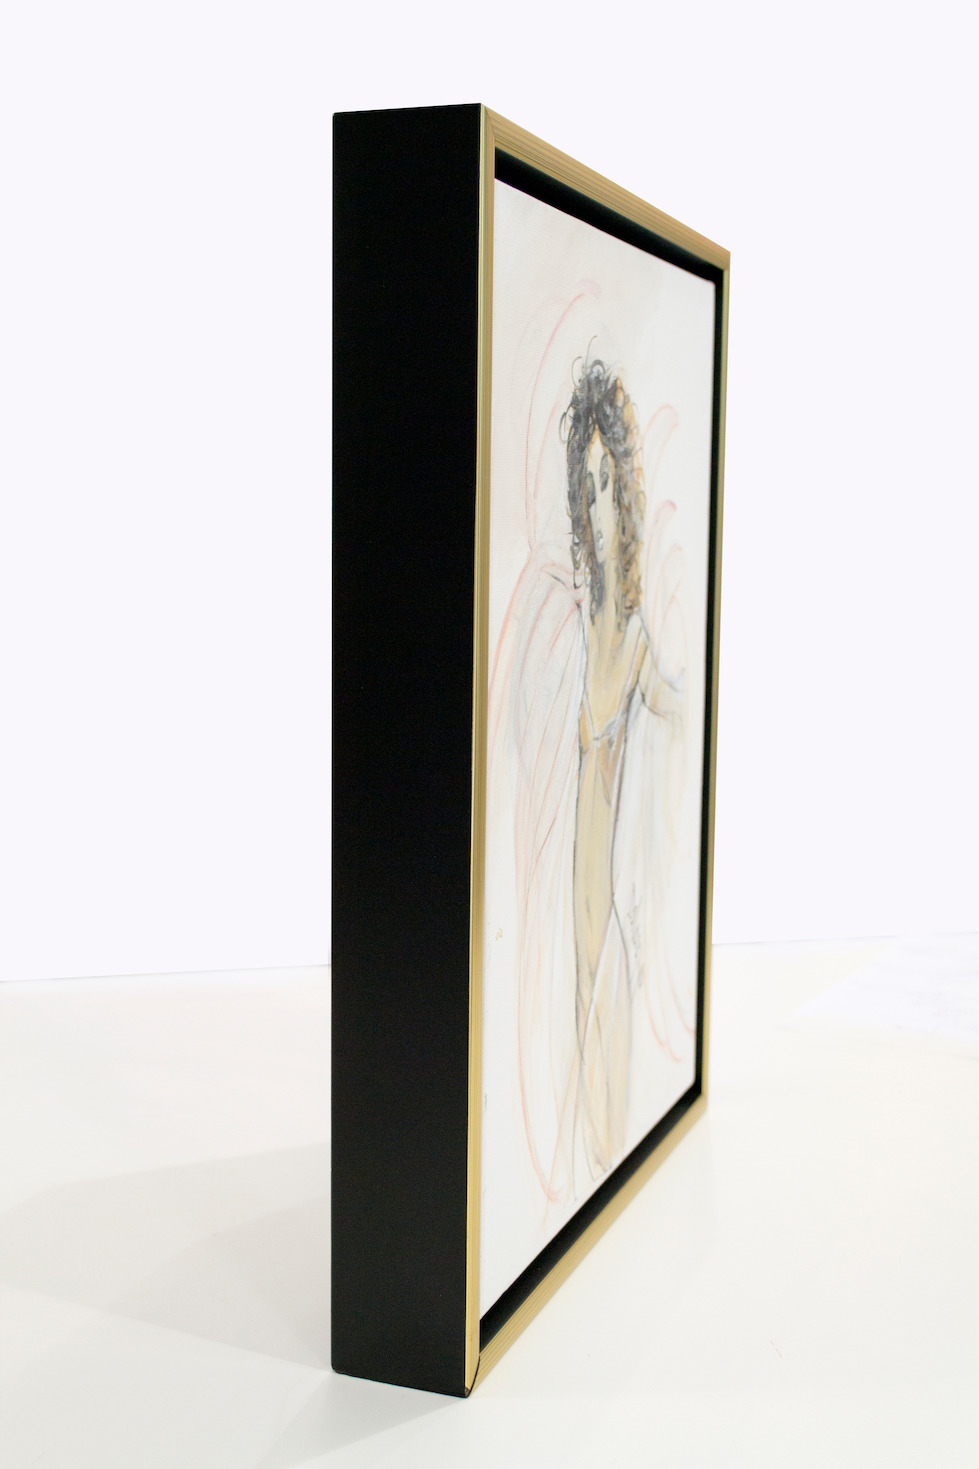 Framed Side View Of Nude Painting "Sensual Lines" By Lucette Dalozzo